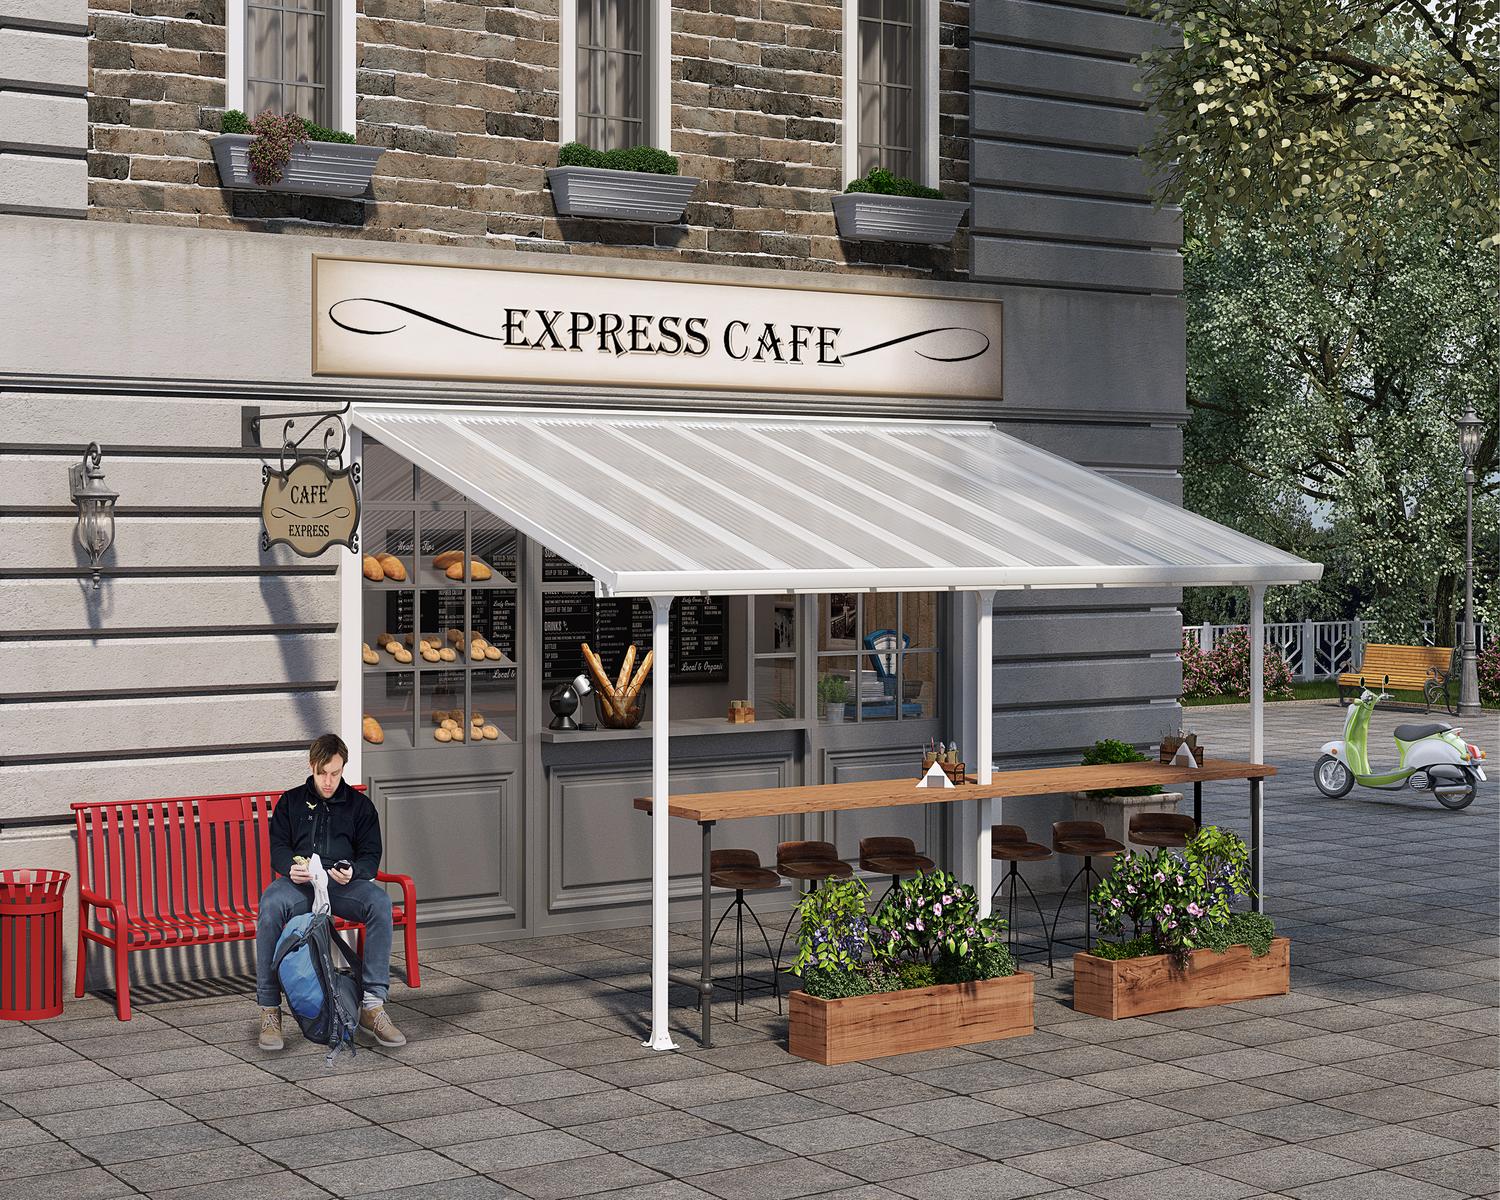 Patio Cover 10 ft. x 18 ft. with polycarbonate roof panels, attached to Coffee Shop to protect customers from the weather